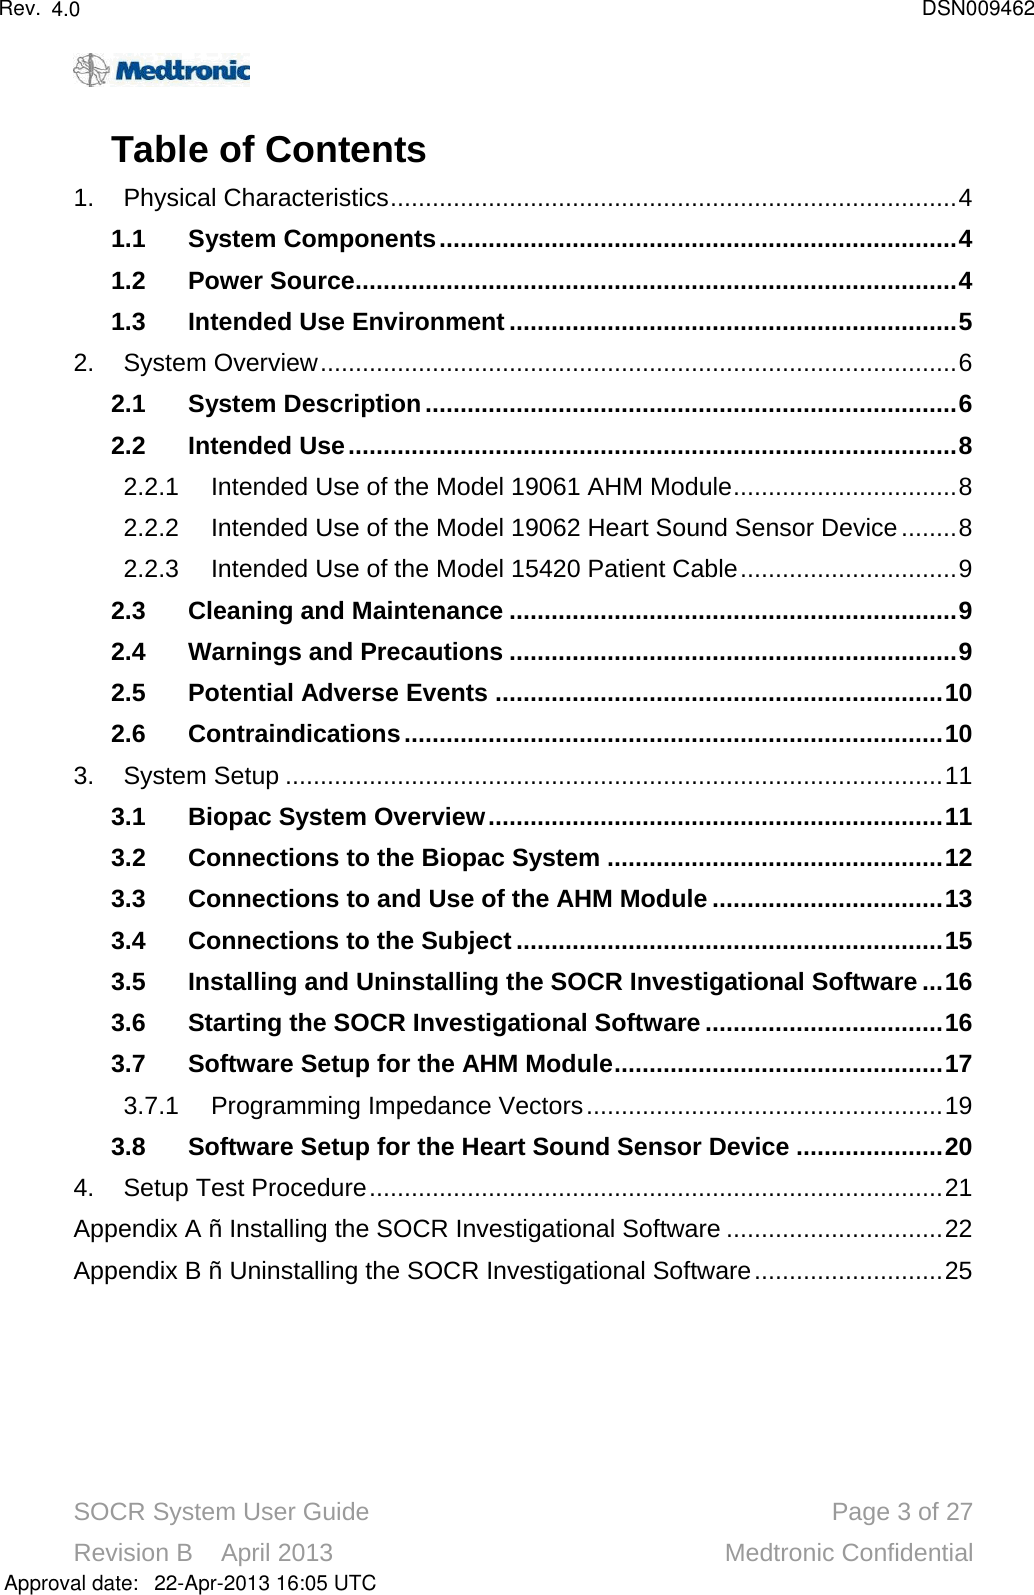 SOCR System User Guide Page 3of 27Revision B    April 2013 Medtronic ConfidentialTable of Contents1. Physical Characteristics.................................................................................41.1 System Components..........................................................................41.2 Power Source......................................................................................41.3 Intended Use Environment ................................................................52. System Overview...........................................................................................62.1 System Description............................................................................62.2 Intended Use.......................................................................................82.2.1 Intended Use of the Model 19061 AHM Module................................82.2.2 Intended Use of the Model 19062 Heart Sound Sensor Device........82.2.3 Intended Use of the Model 15420 Patient Cable...............................92.3 Cleaning and Maintenance ................................................................92.4 Warnings and Precautions ................................................................92.5 Potential Adverse Events ................................................................102.6 Contraindications.............................................................................103. System Setup ..............................................................................................113.1 Biopac System Overview.................................................................113.2Connections to the Biopac System ................................................123.3 Connections to and Use of the AHM Module .................................133.4 Connections to the Subject .............................................................153.5 Installing and Uninstalling the SOCR Investigational Software ...163.6 Starting the SOCR Investigational Software ..................................163.7 Software Setup for the AHM Module...............................................173.7.1 Programming Impedance Vectors...................................................193.8 Software Setup for the Heart Sound Sensor Device .....................204. Setup Test Procedure..................................................................................21Appendix A –Installing the SOCR Investigational Software ...............................22Appendix B –Uninstalling the SOCR Investigational Software...........................25Approval date:4.0 DSN00946222-Apr-2013 16:05 UTCRev.